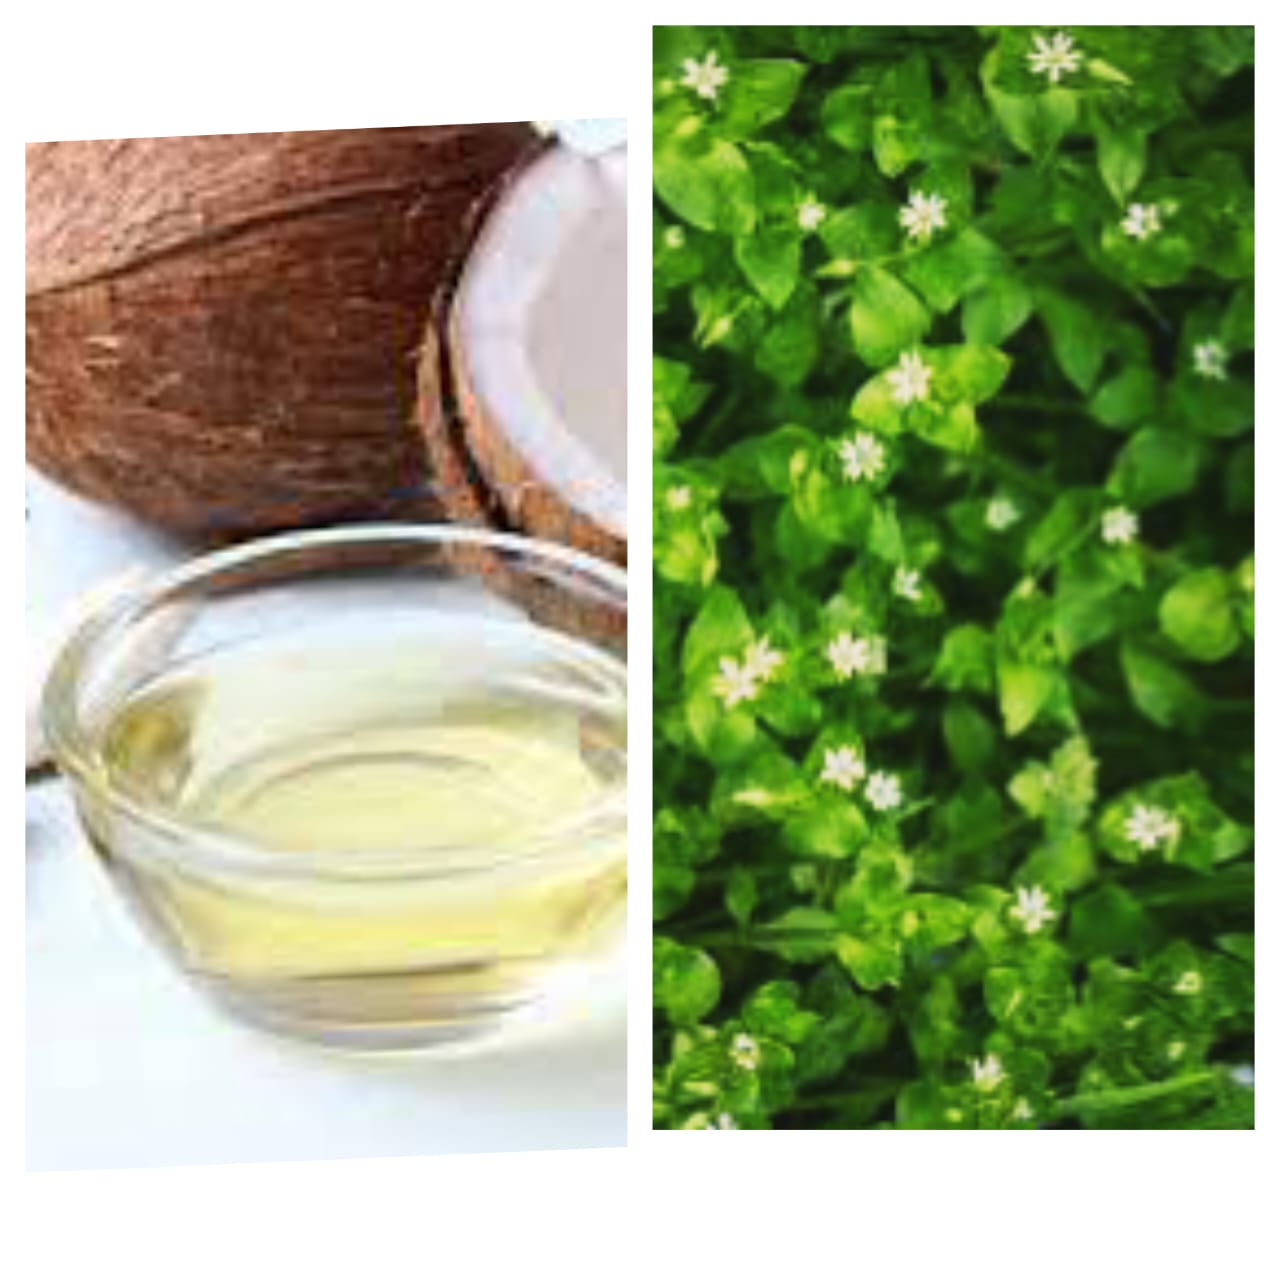 Chickweed and coconut oil for eczema and psoriasis